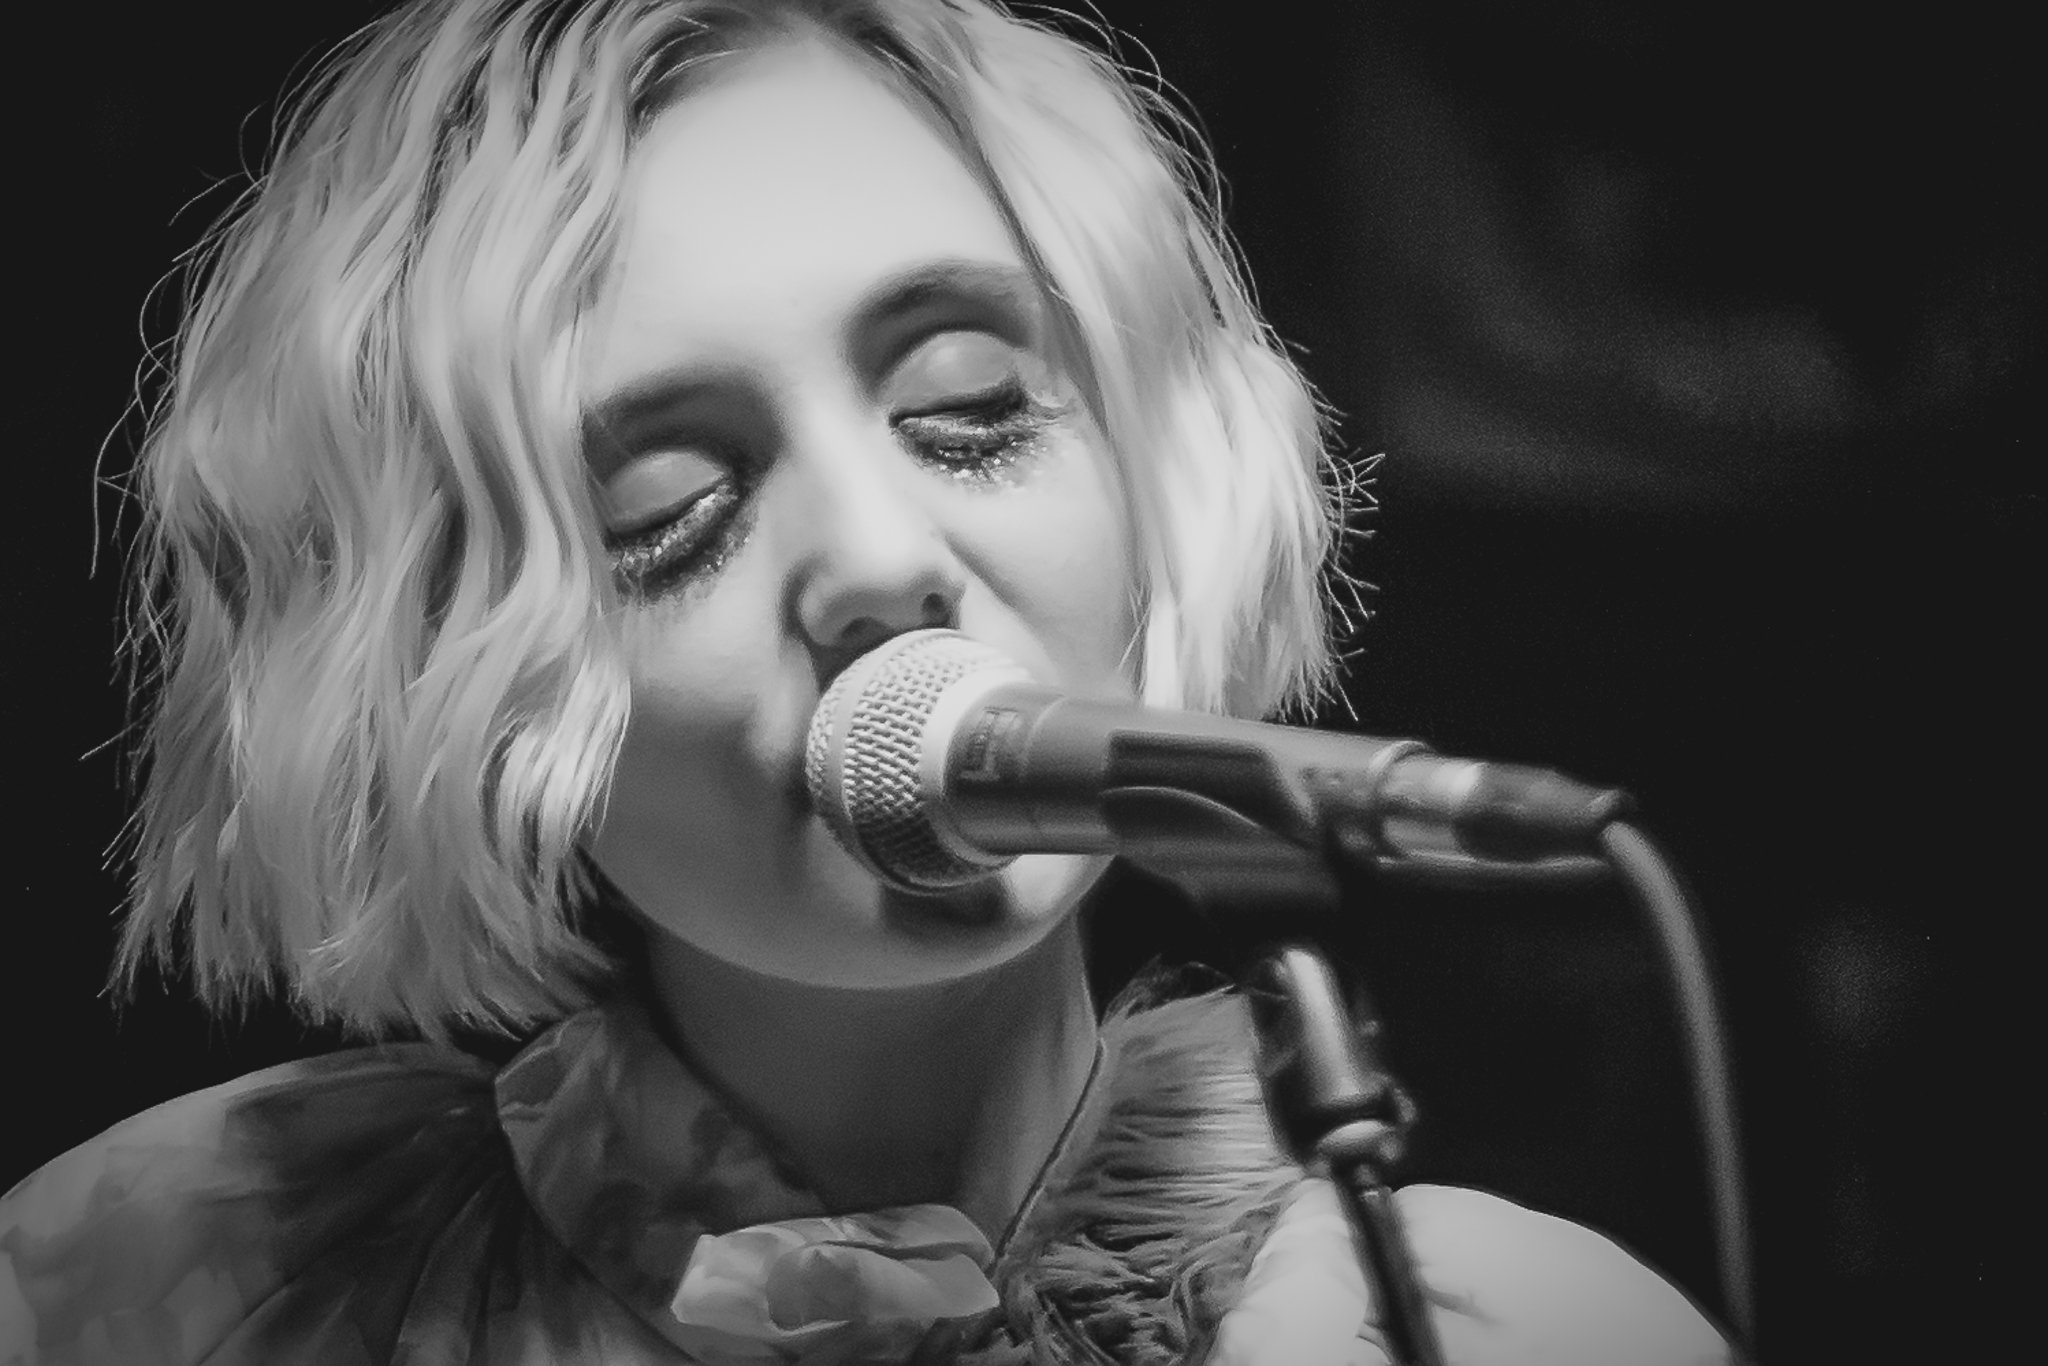  Jessica Lea Mayfield at Pappy &amp; Harriet’s, Pioneertown, CA  ©Mickey Strider 